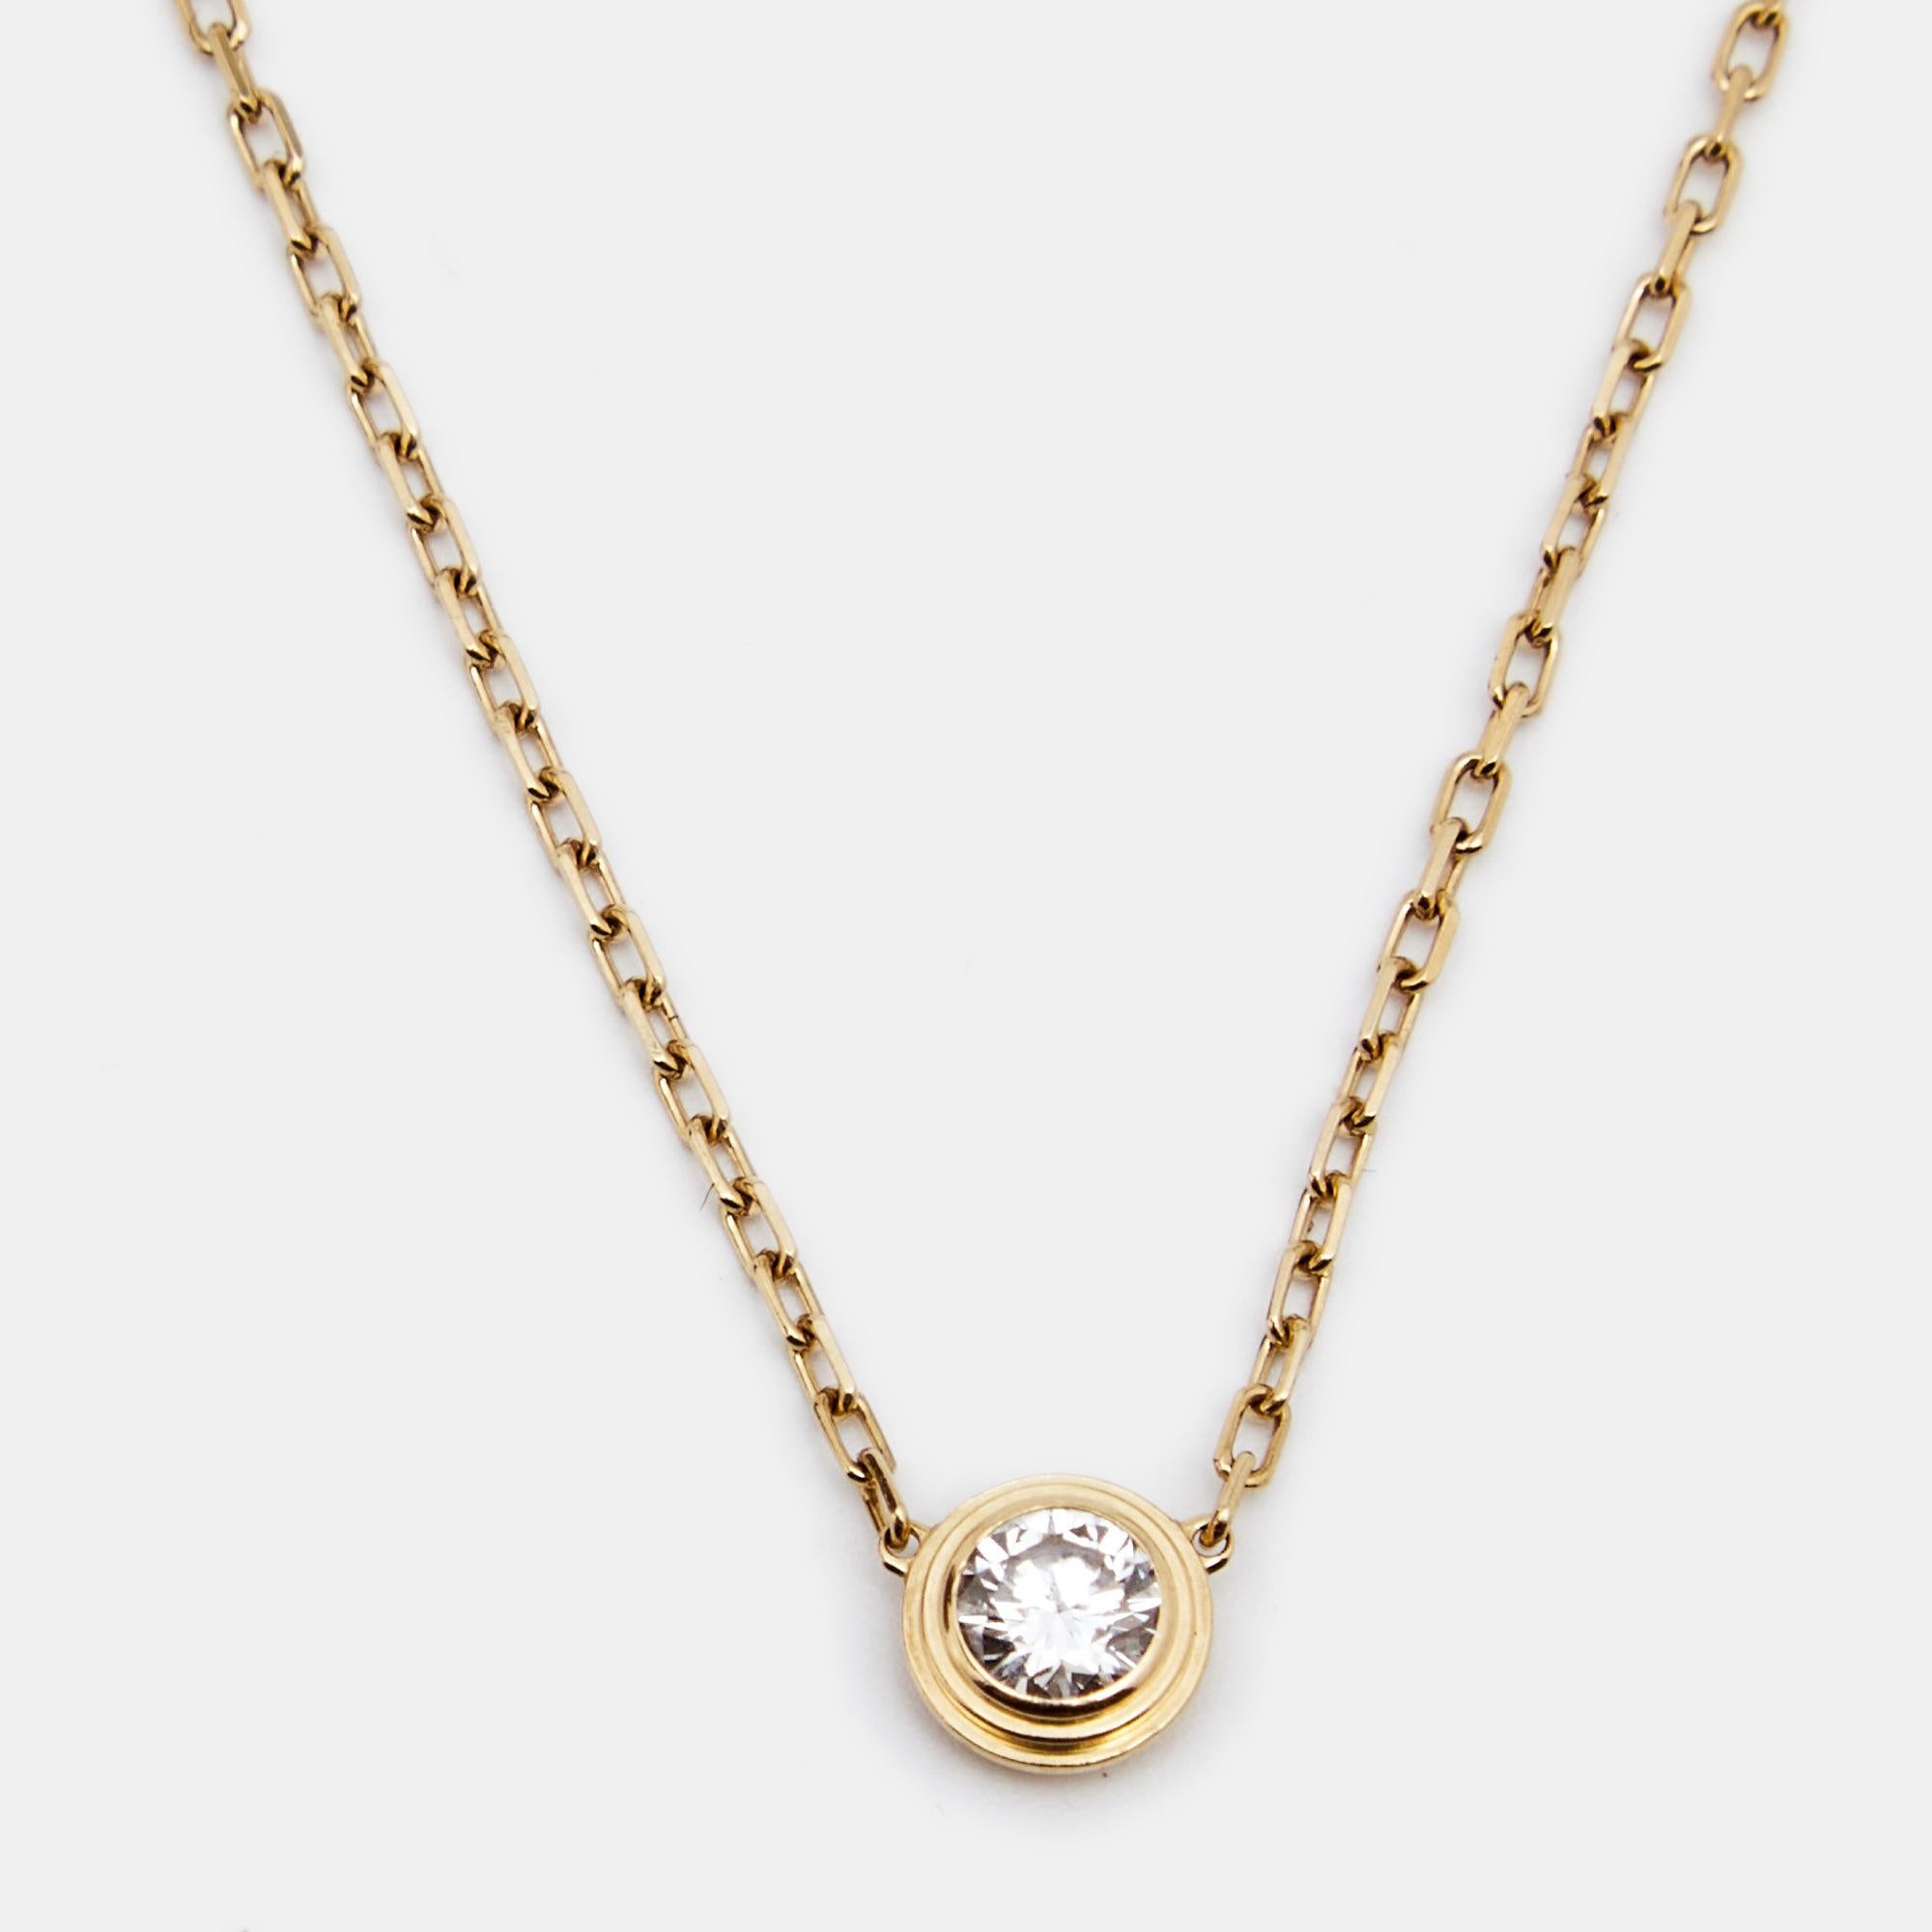 The Diamants Legers collection by Cartier is all about bringing feminine elegance into light by deploying exceptional diamonds into minimalist designs. This necklace rendered in 18k yellow gold exhibits just that. It consists of a simple chain